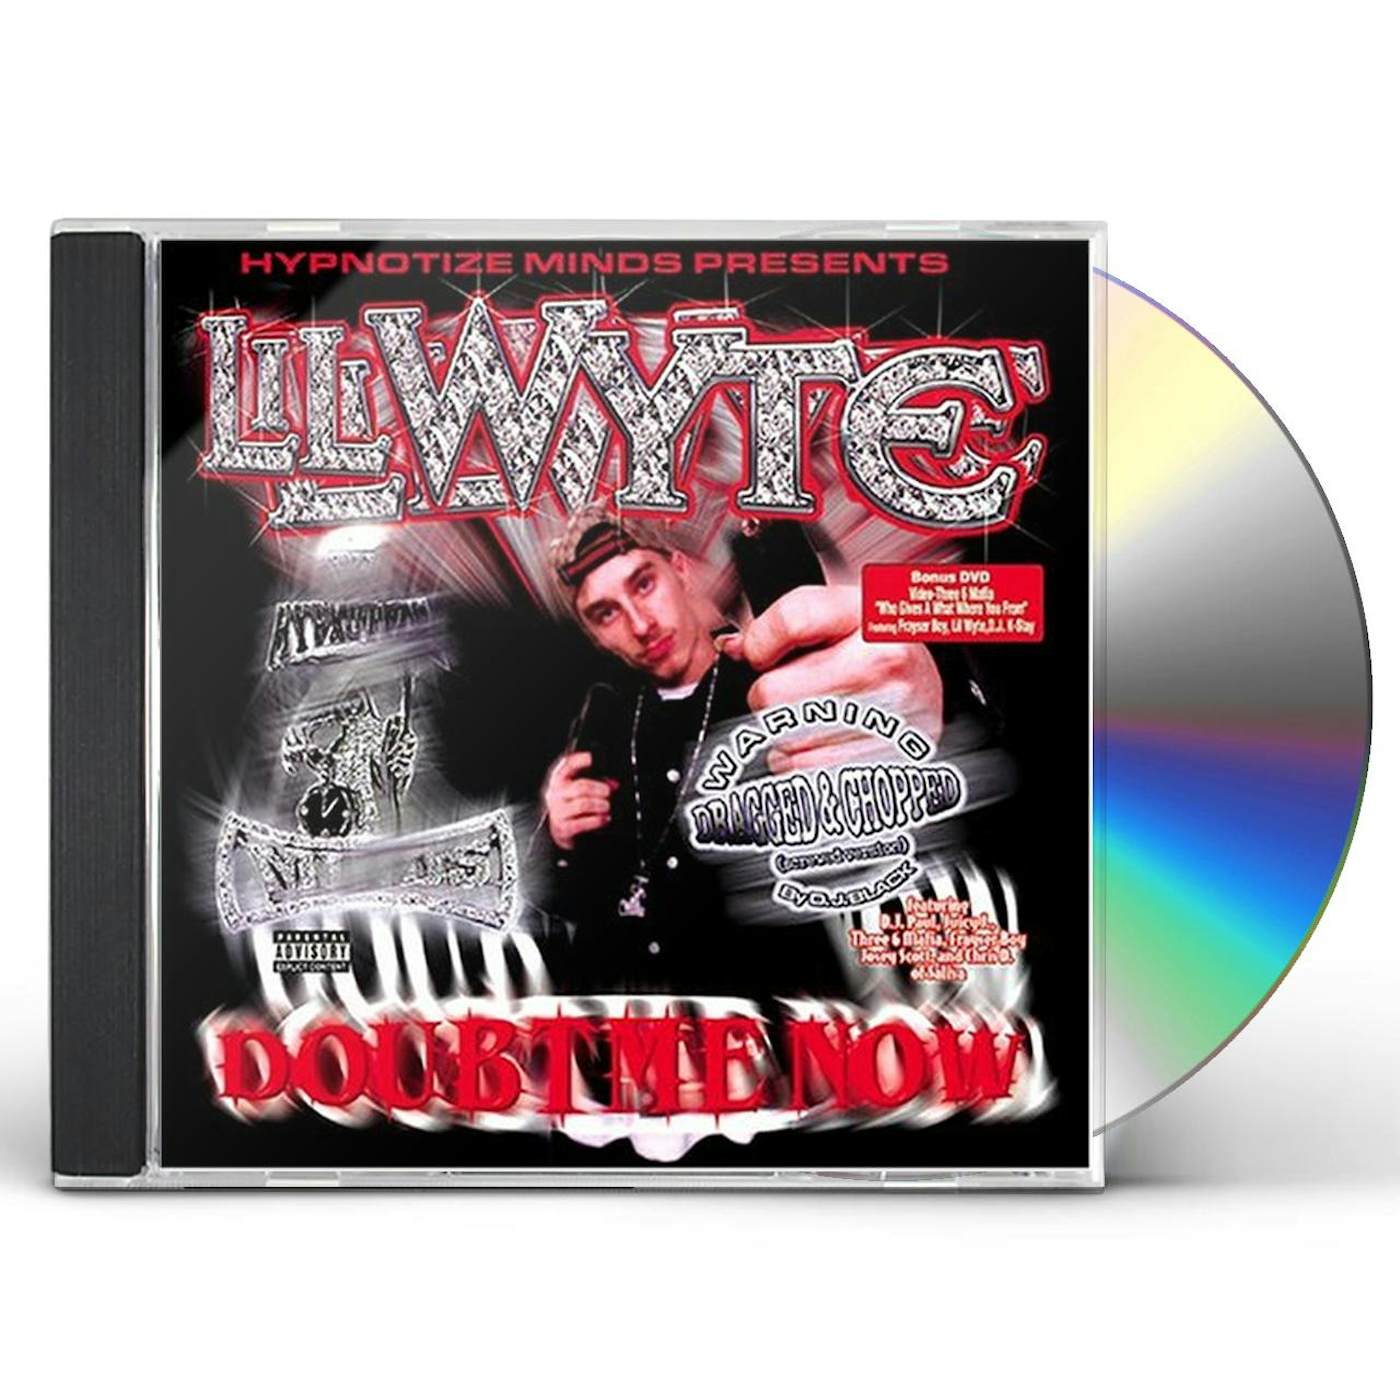 Lil Wyte DOUBT ME NOW: SURPED UP & SCREWED CD